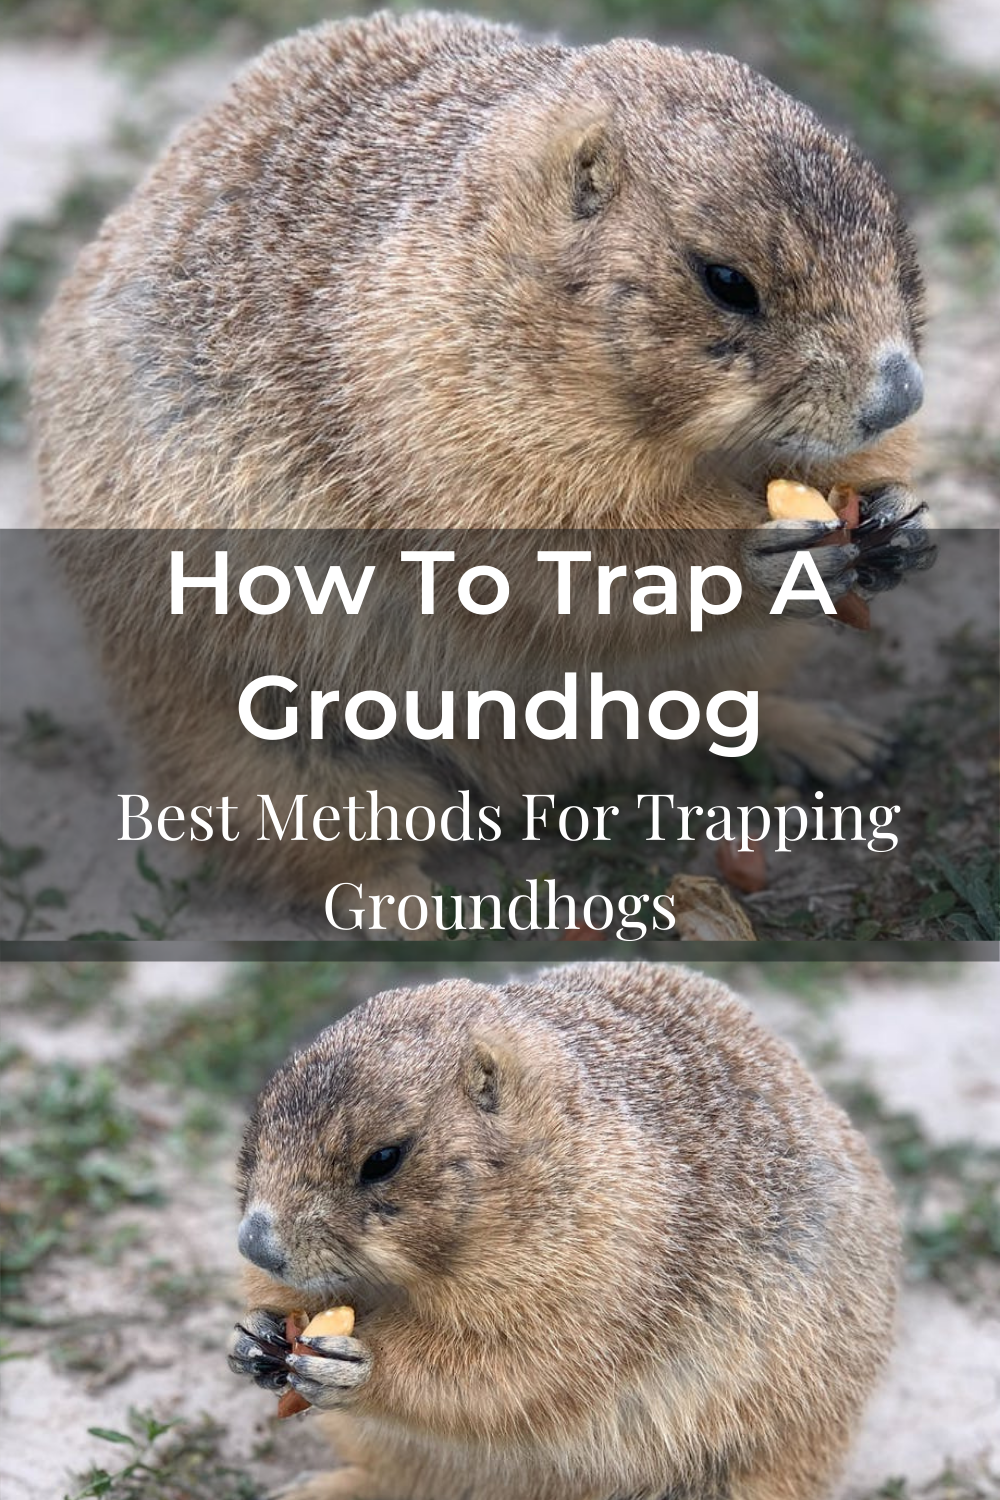 How To Trap A Groundhog Easily | Best Methods For Trapping Groundhogs